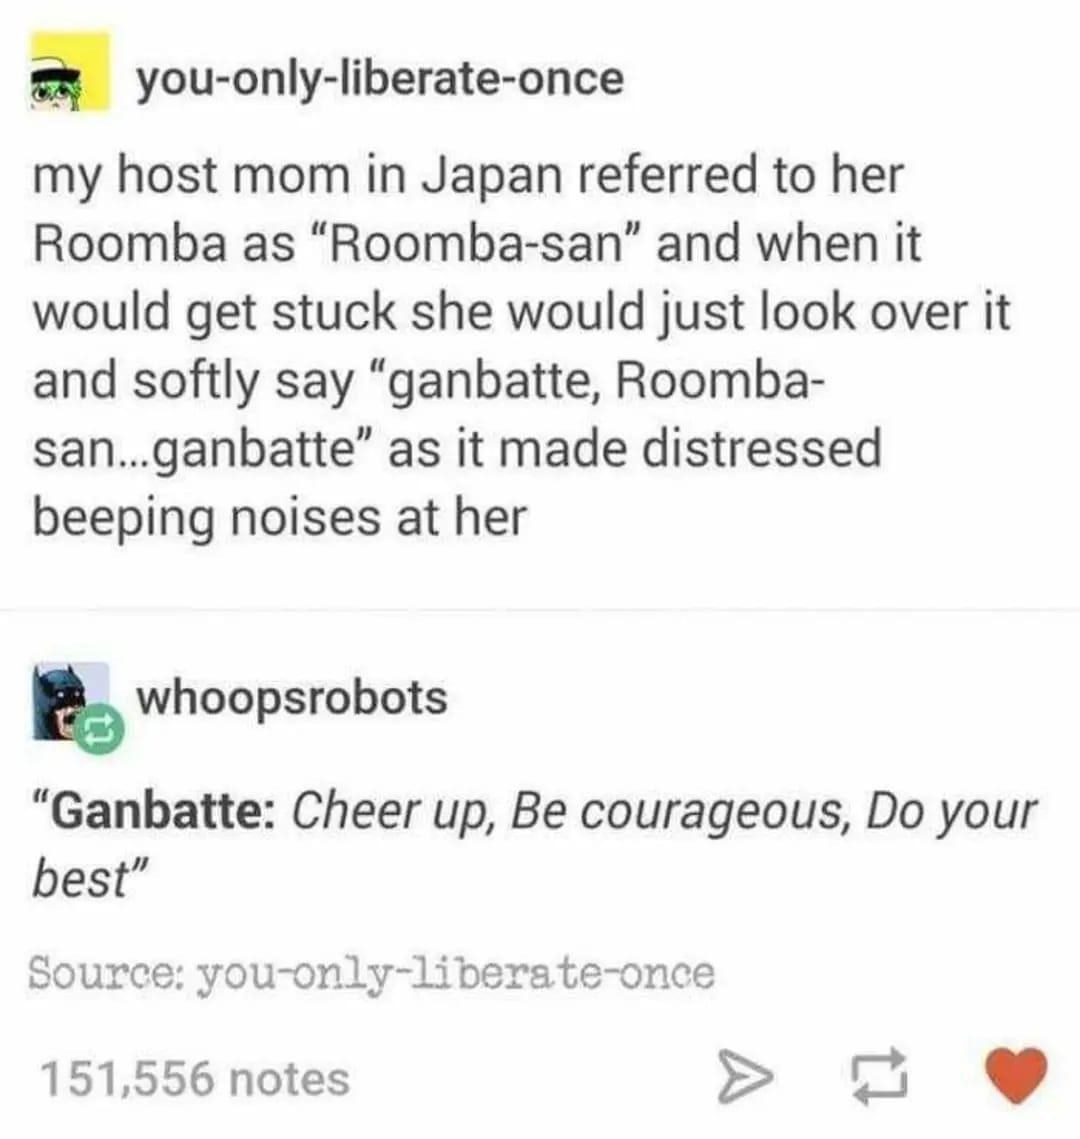 Person&#x27;s host mom in Japan would encourage their Roomba when it got stuck: &quot;Ganbatte, Roomba-san, ganbatte&quot; (&quot;Ganbatte&quot; means cheer up, be courageous, do your best&quot;